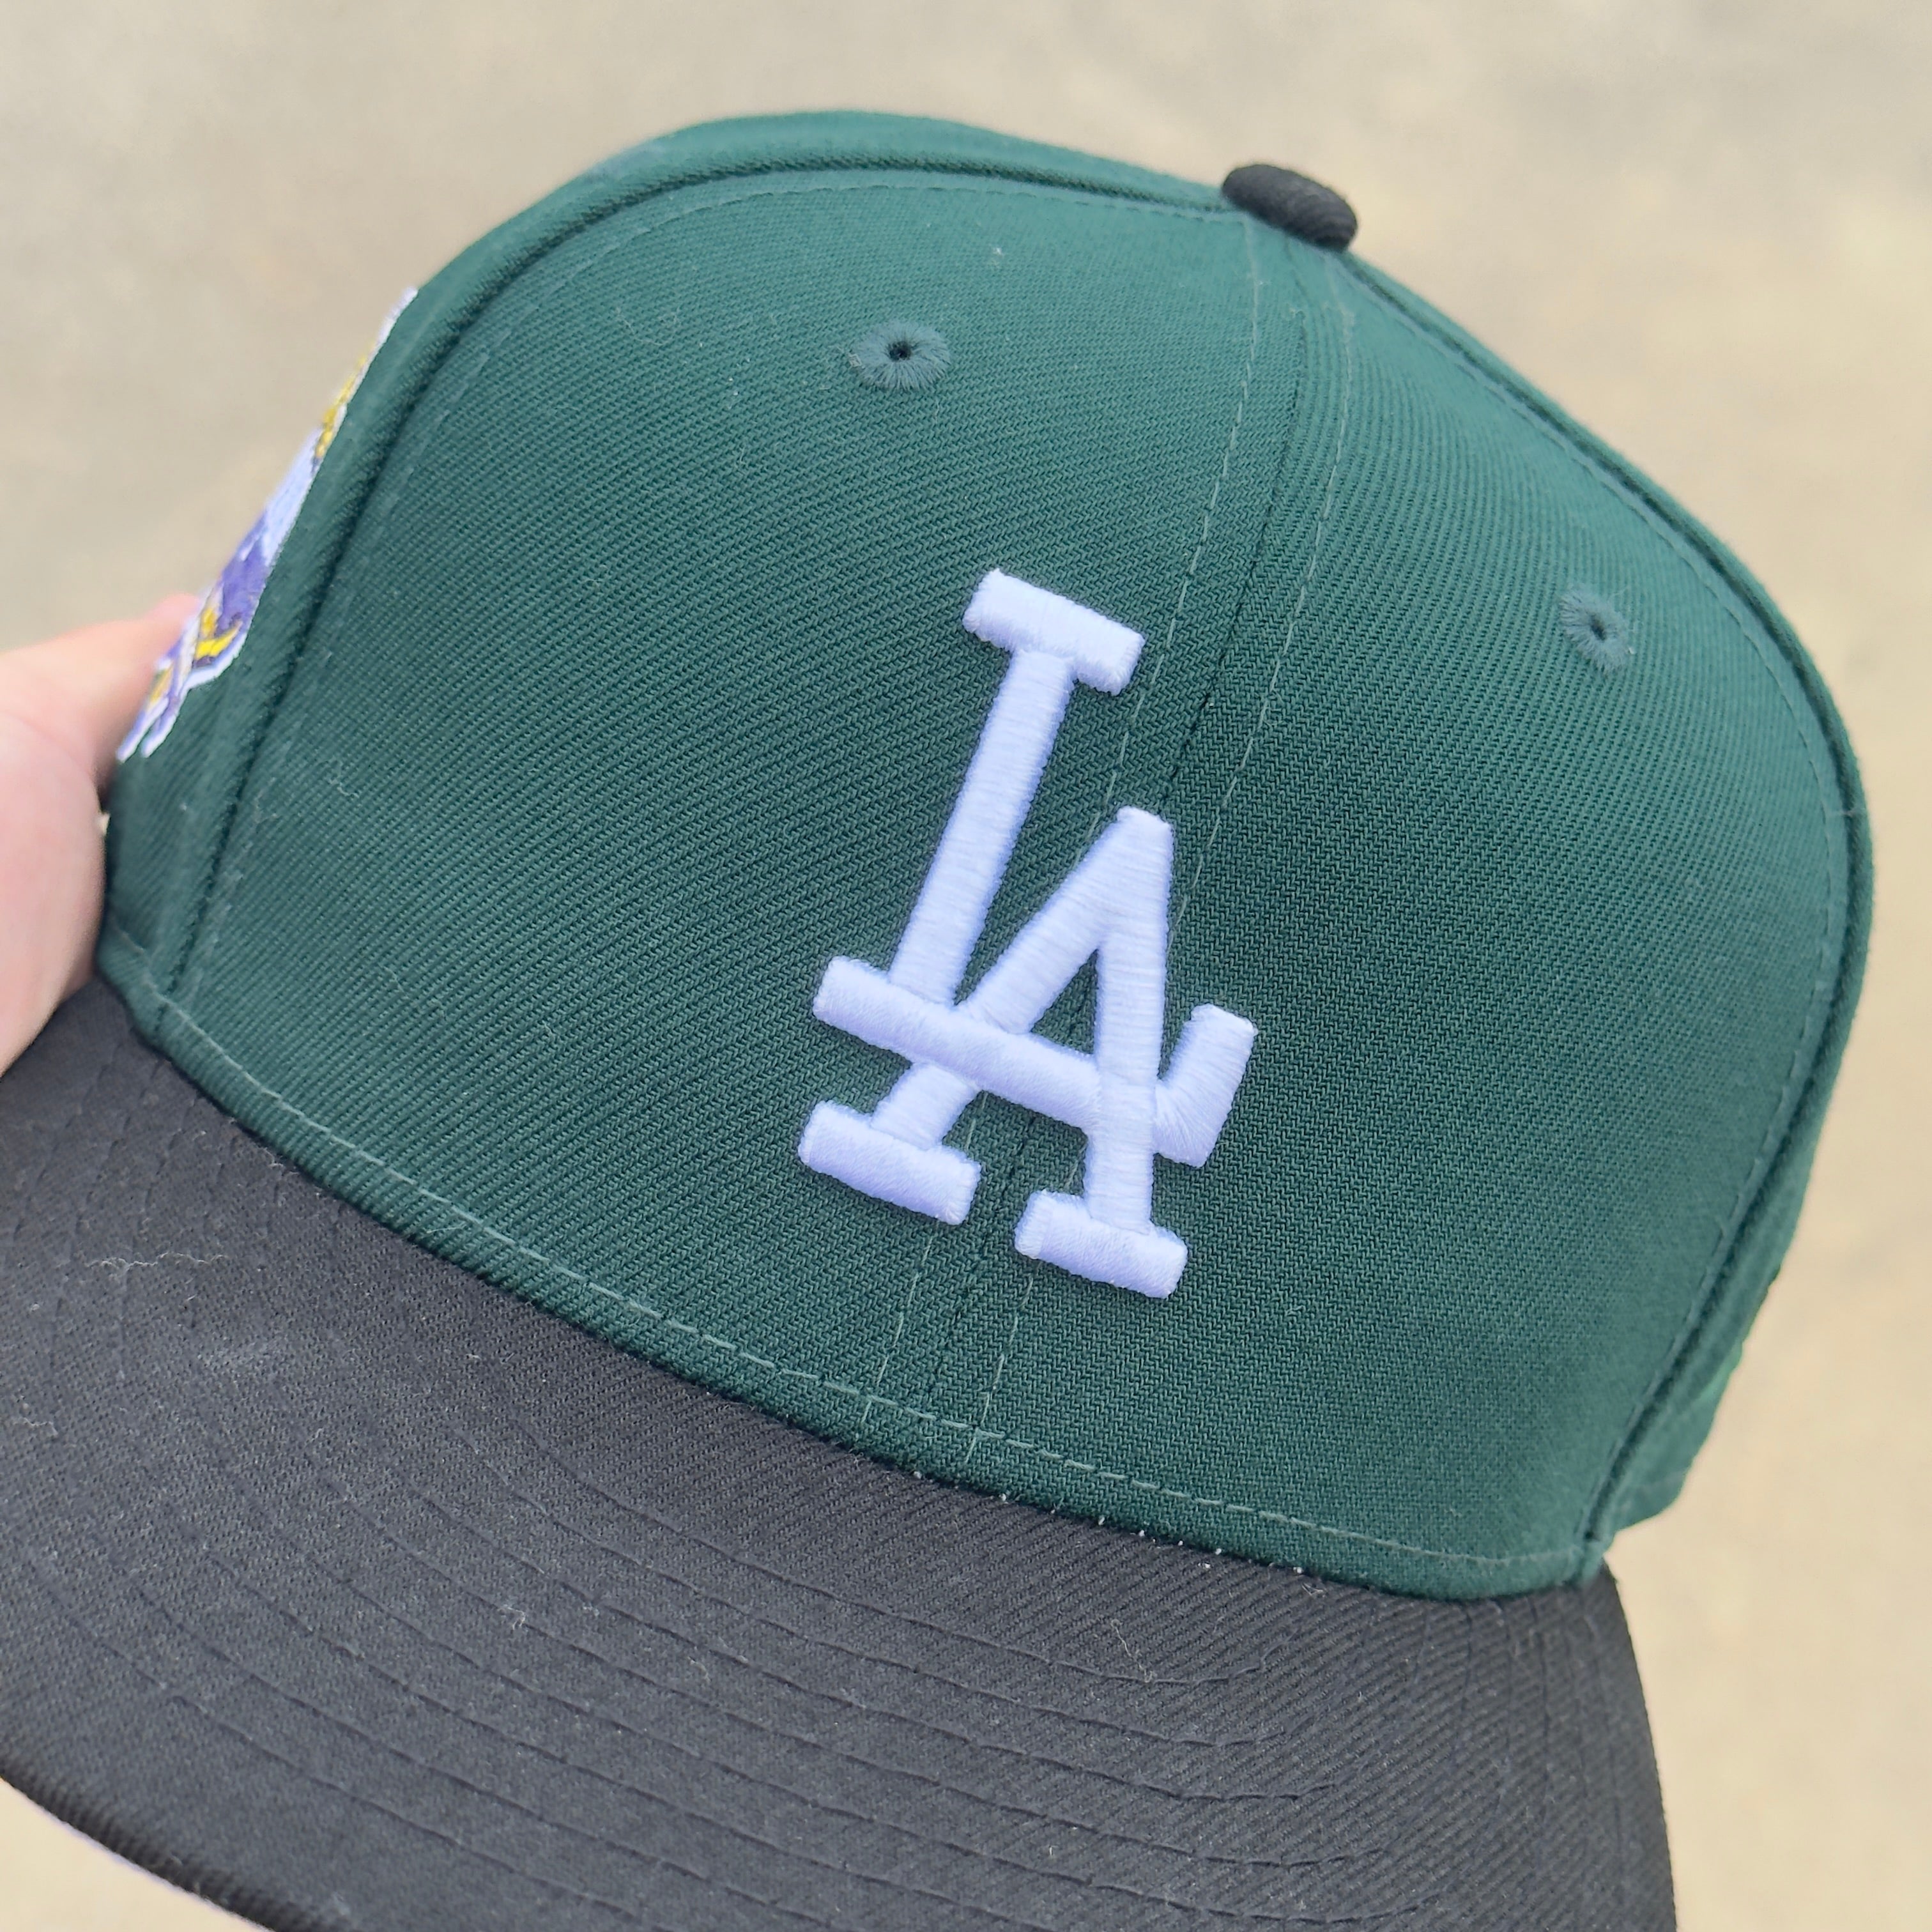 7 5/8 USED Green Los Angeles Dodgers Dodger Stadium 59fifty New Era Fitted Hat Cap